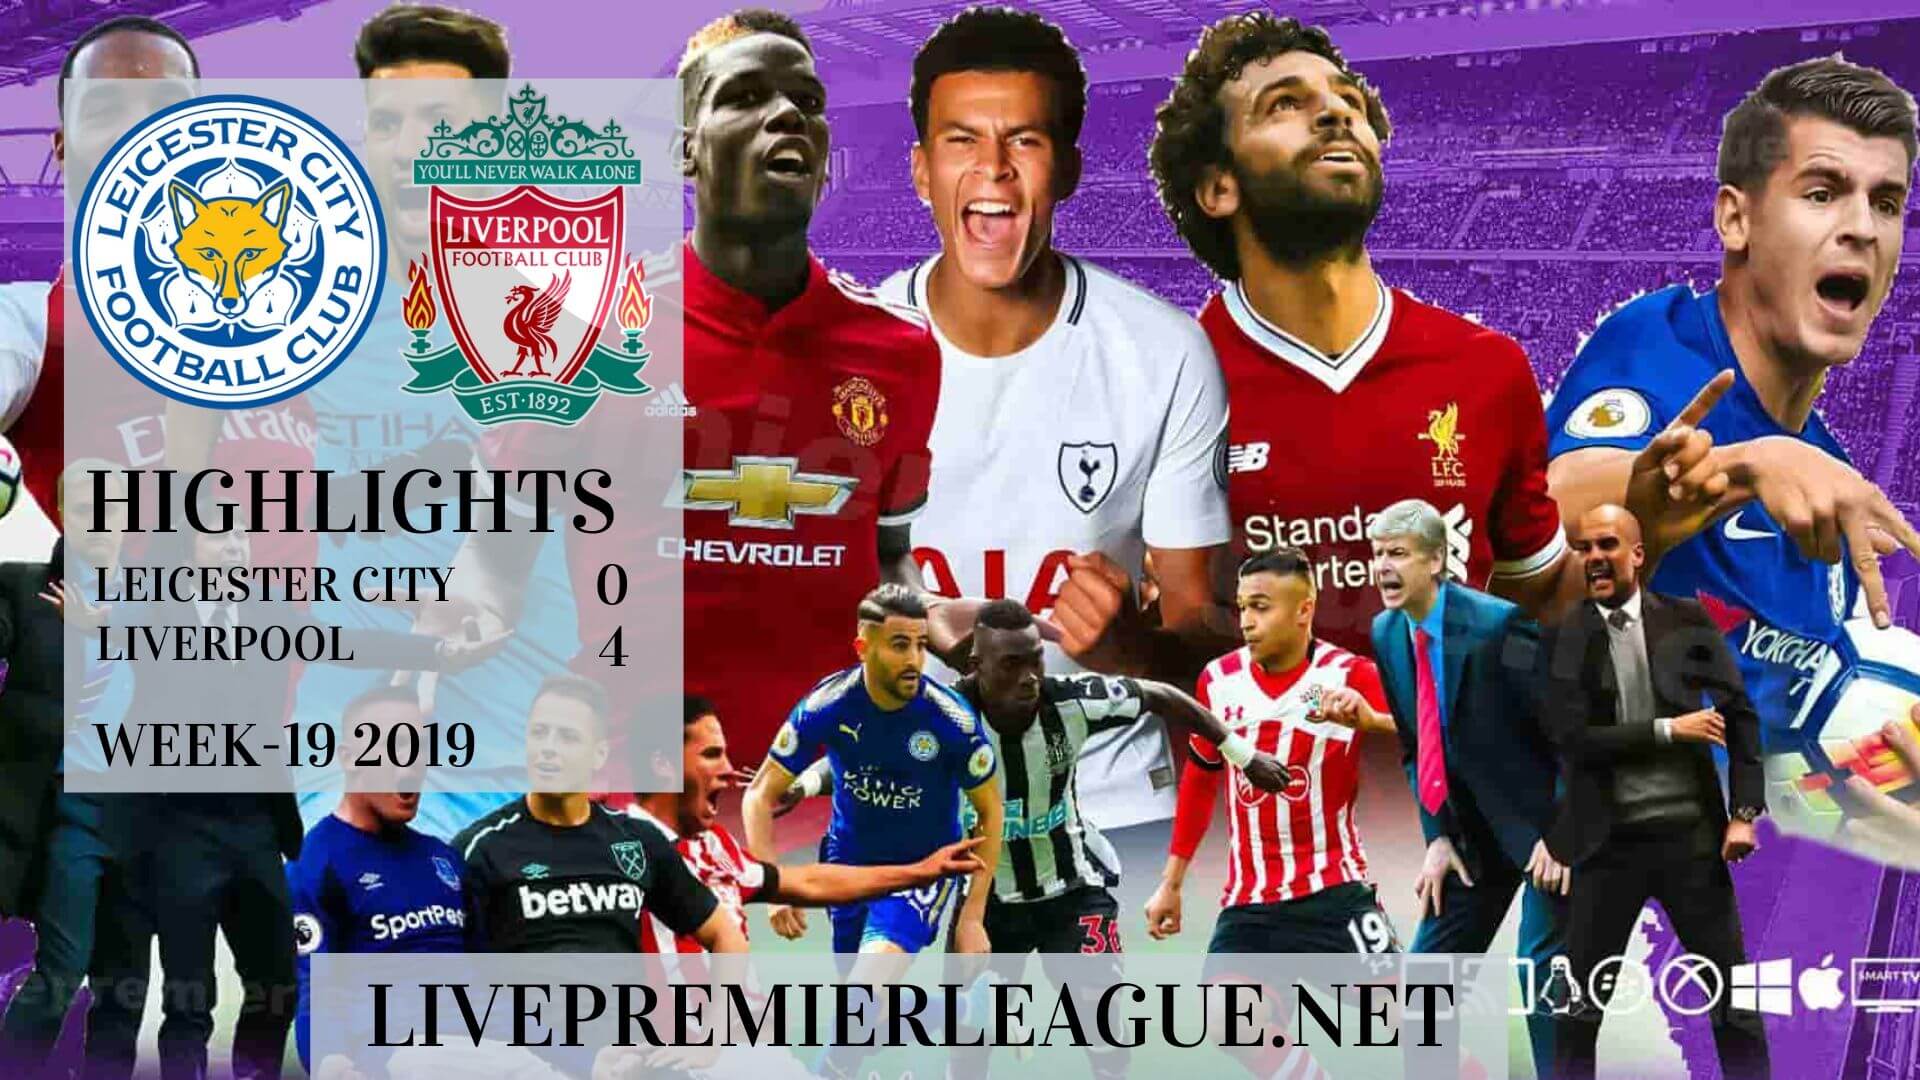 Leicester City Vs Liverpool Highlights 2019 Week 19